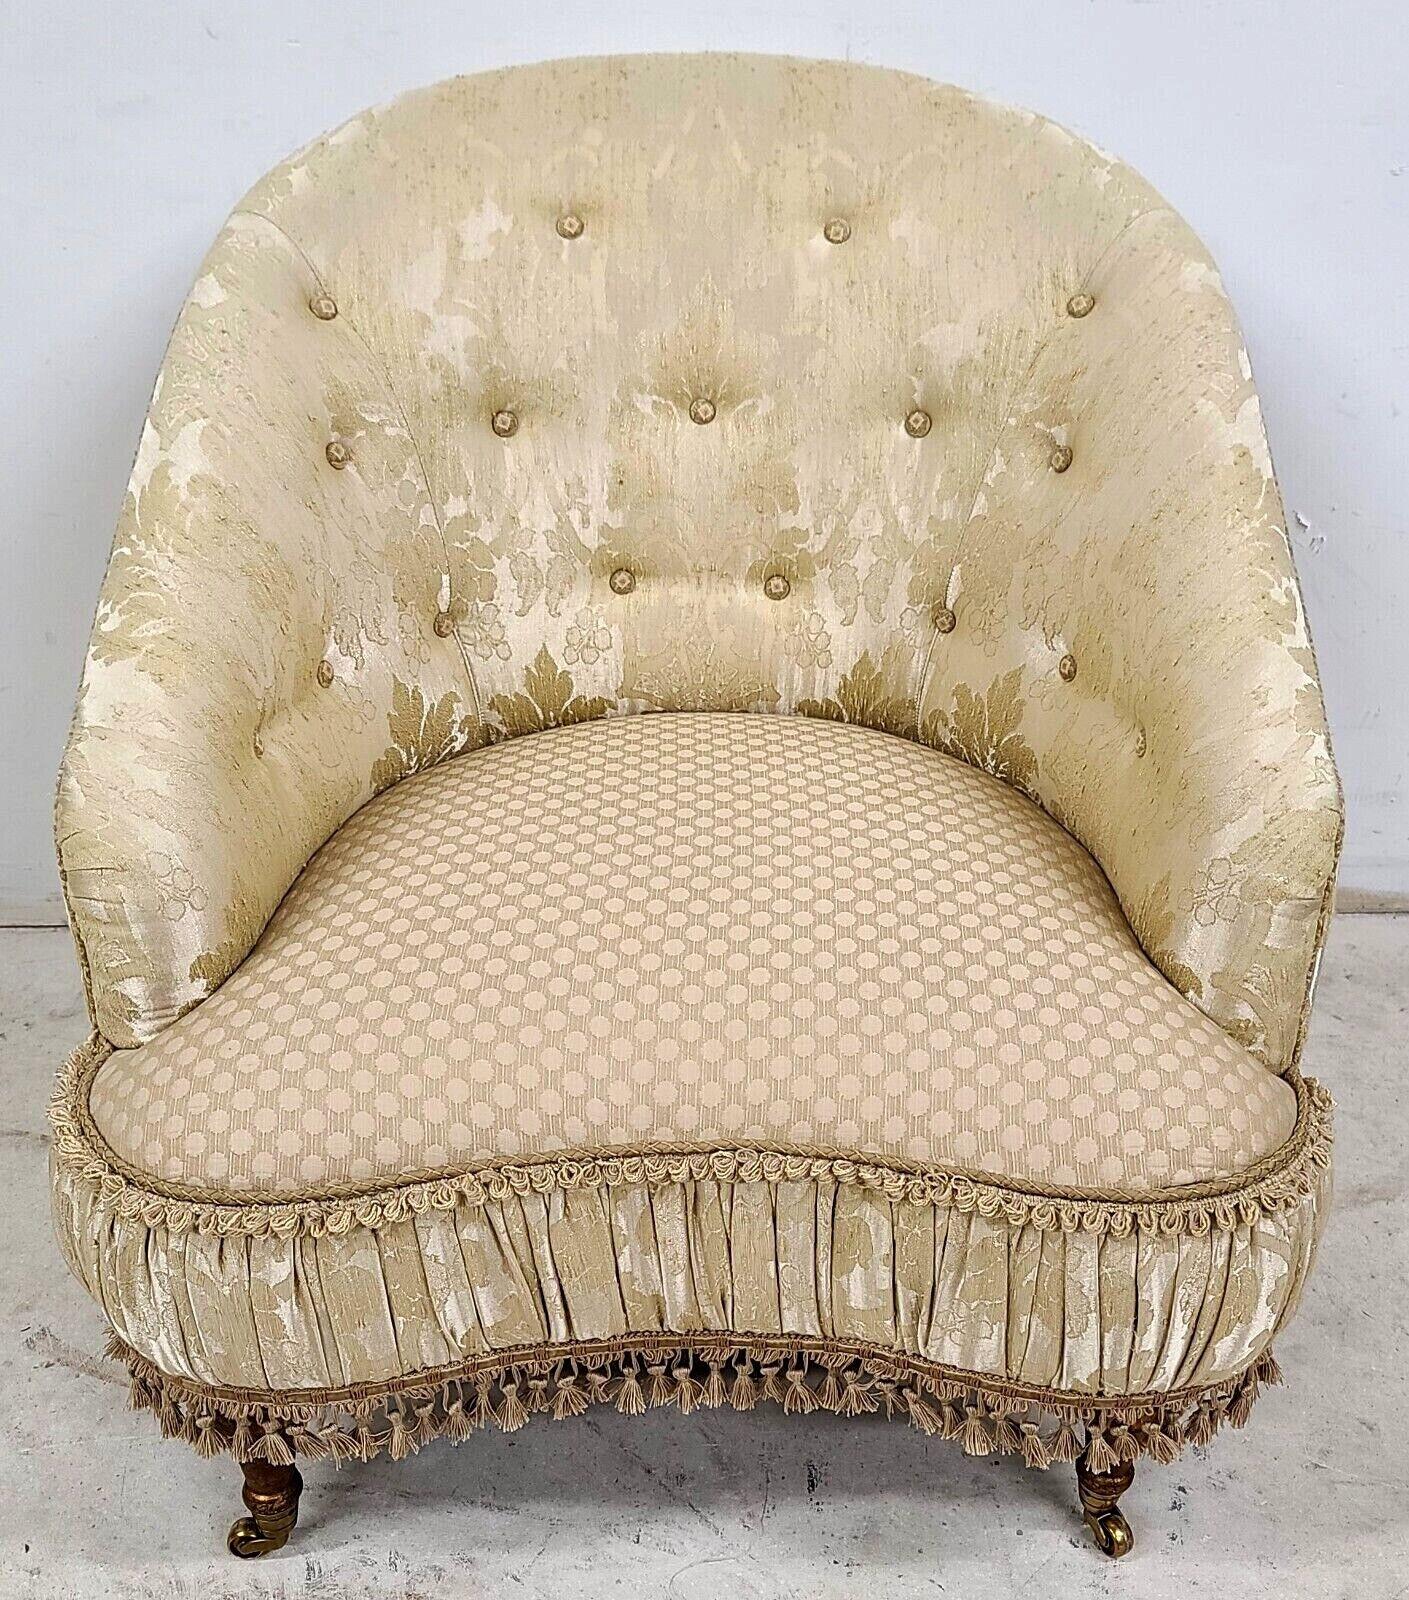 For FULL item description be sure to click on CONTINUE READING at the bottom of this listing.

Offering one of our recent palm beach estate fine furniture acquisitions of a
really stunningly beautiful accent chair attributed to CAROL HICKS BOLTON